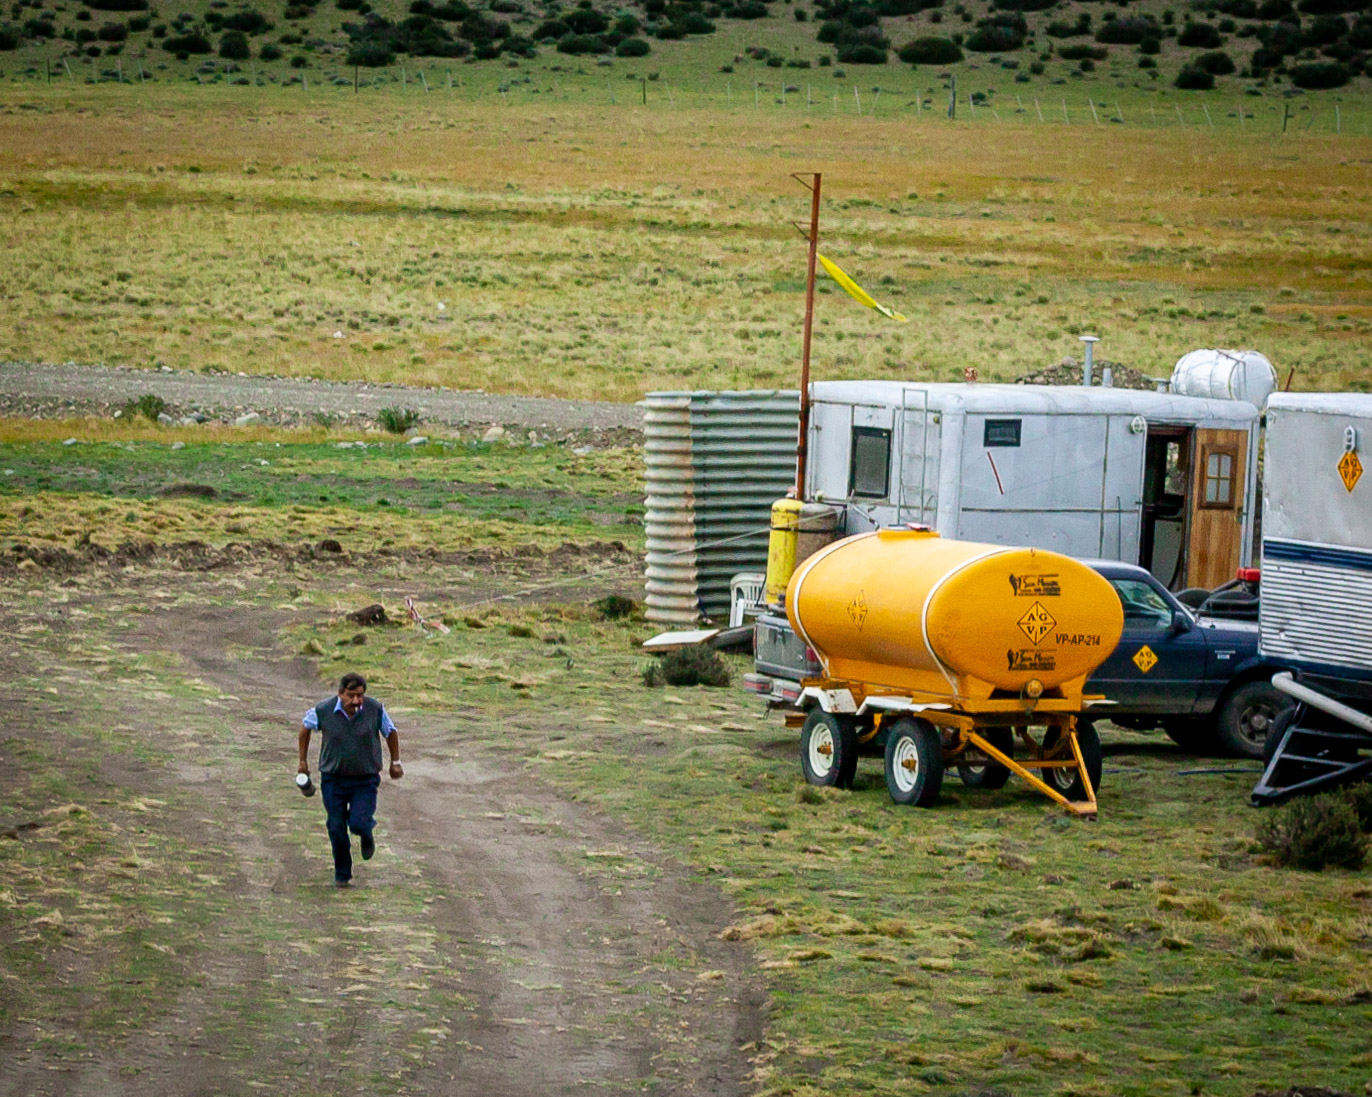 Bus driver stopping in the middle of nowhere to get more hot water for maté